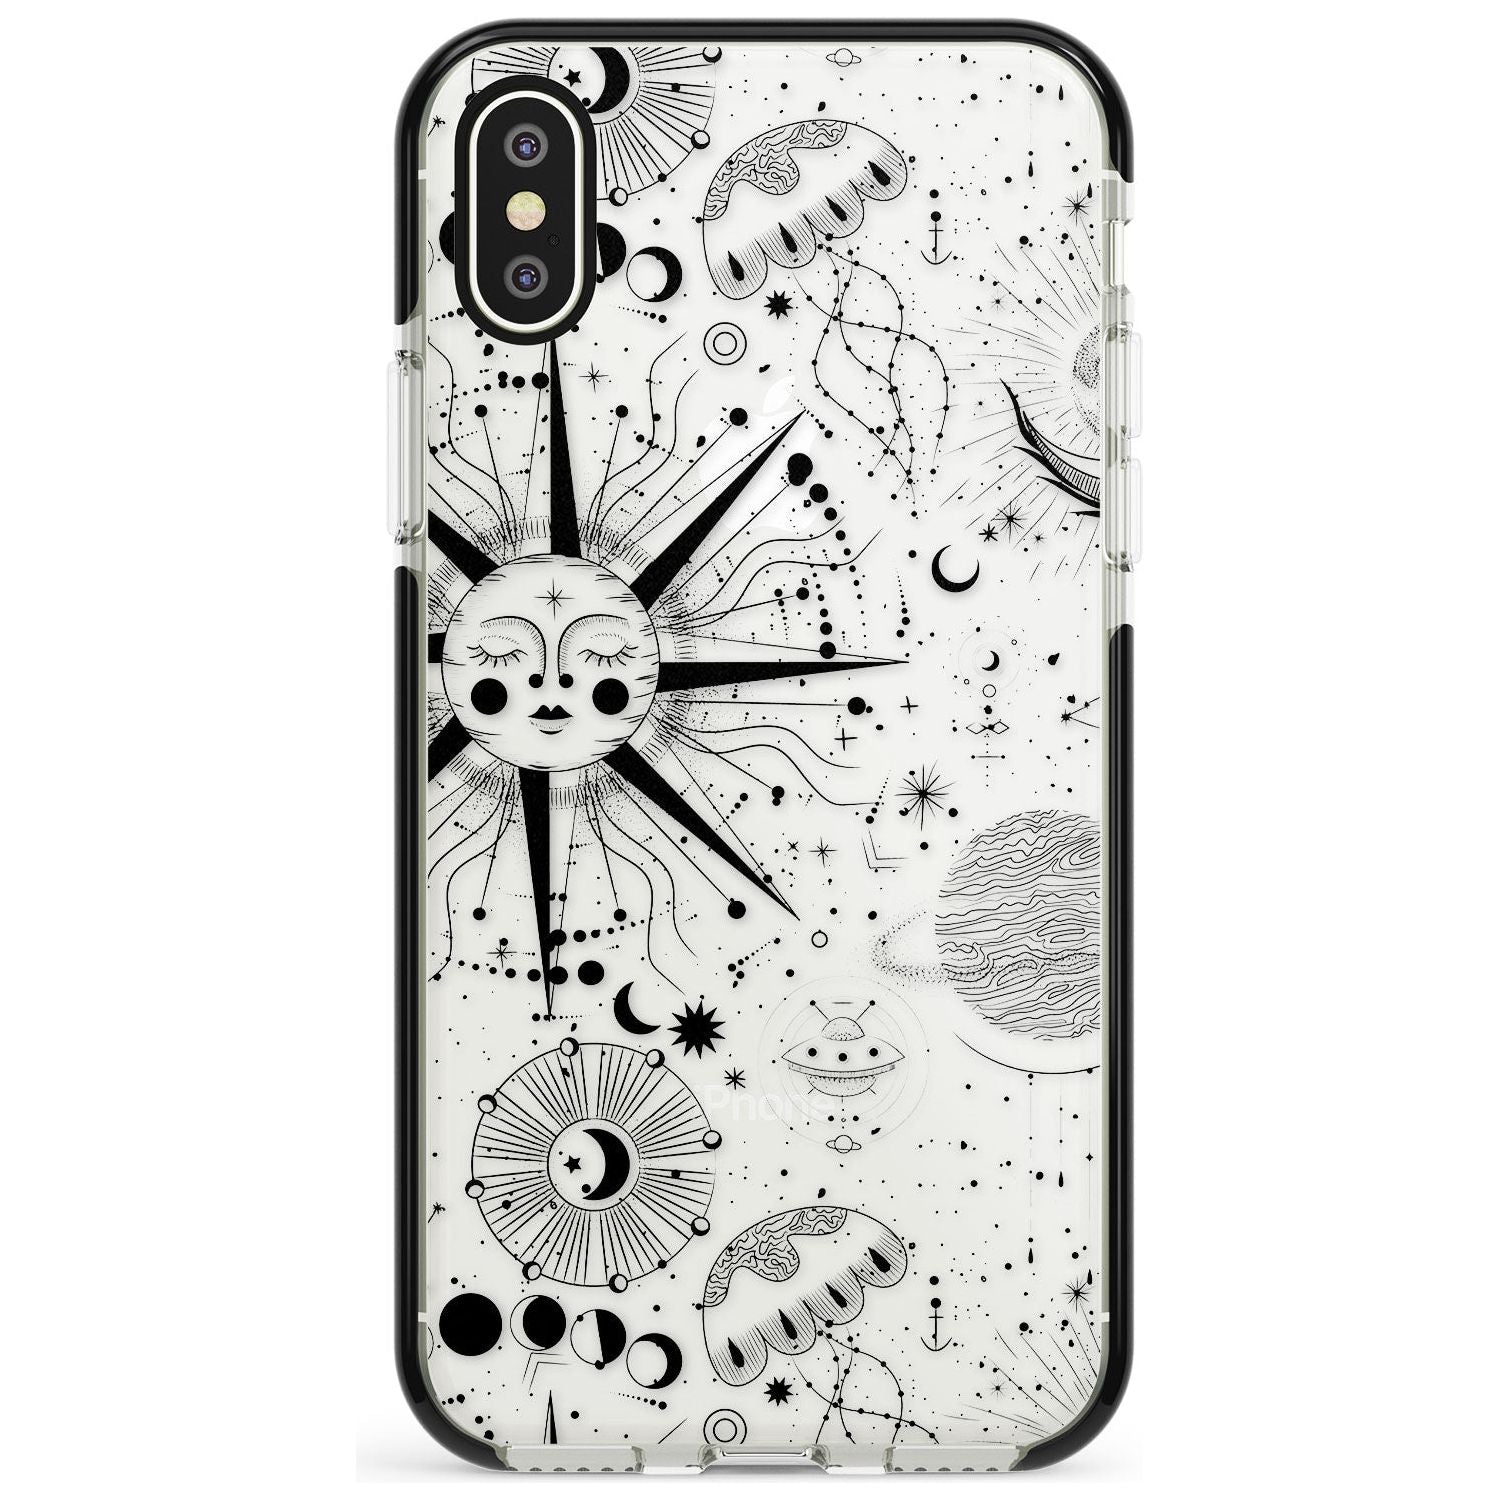 Large Sun Vintage Astrological Black Impact Phone Case for iPhone X XS Max XR